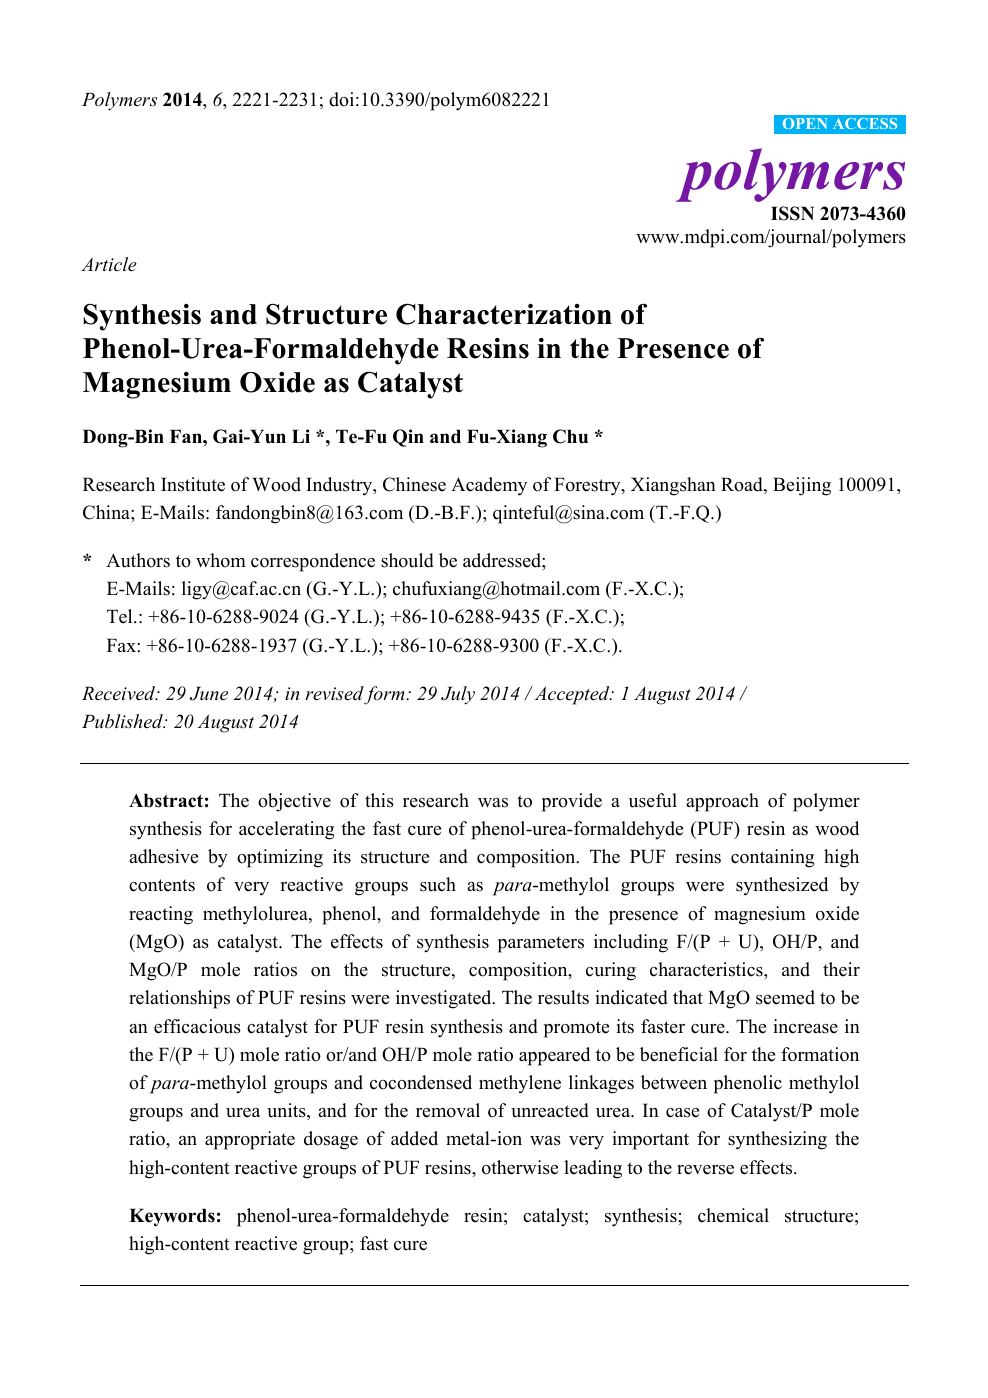 Synthesis And Structure Characterization Of Phenol Urea Formaldehyde Resins In The Presence Of Magnesium Oxide As Catalyst Topic Of Research Paper In Chemical Sciences Download Scholarly Article Pdf And Read For Free On